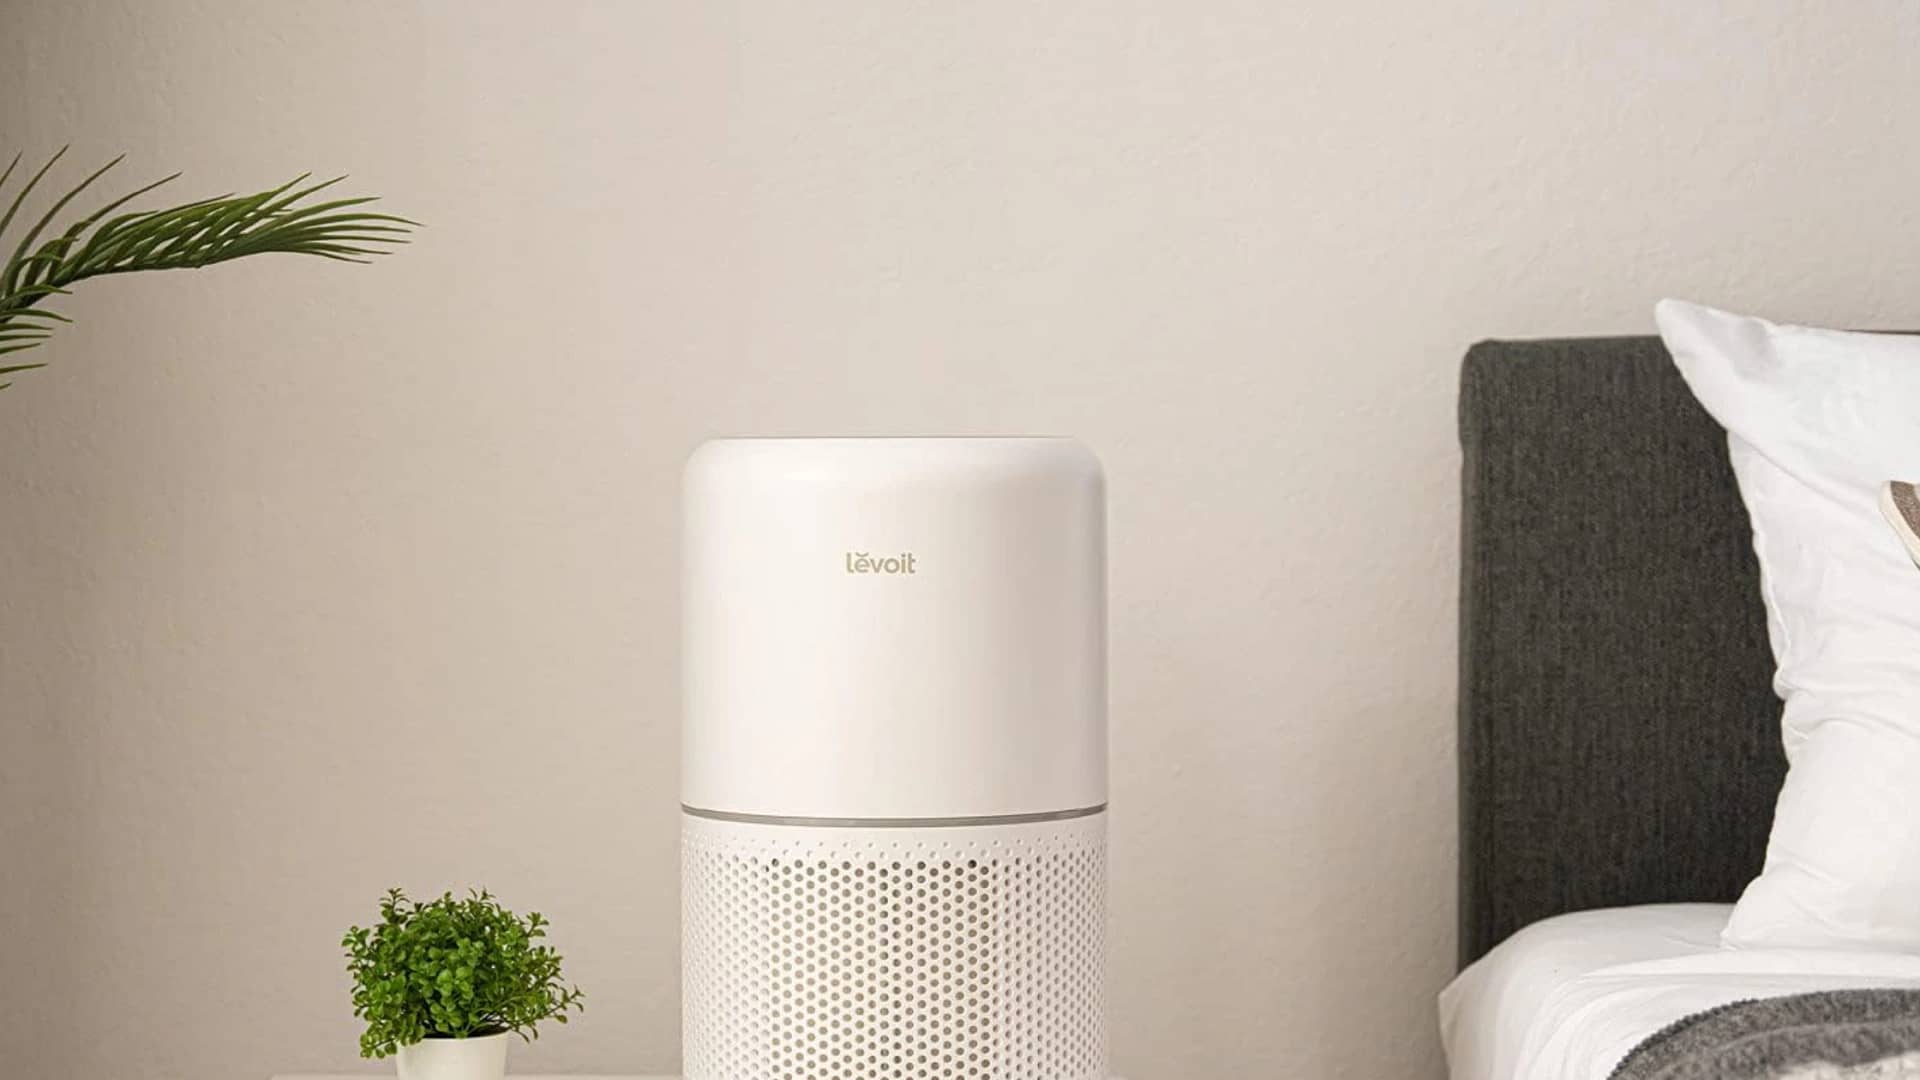 "Image of the top-rated air purifier for mold, the LEVOIT Core 300, providing clean and healthy indoor air."